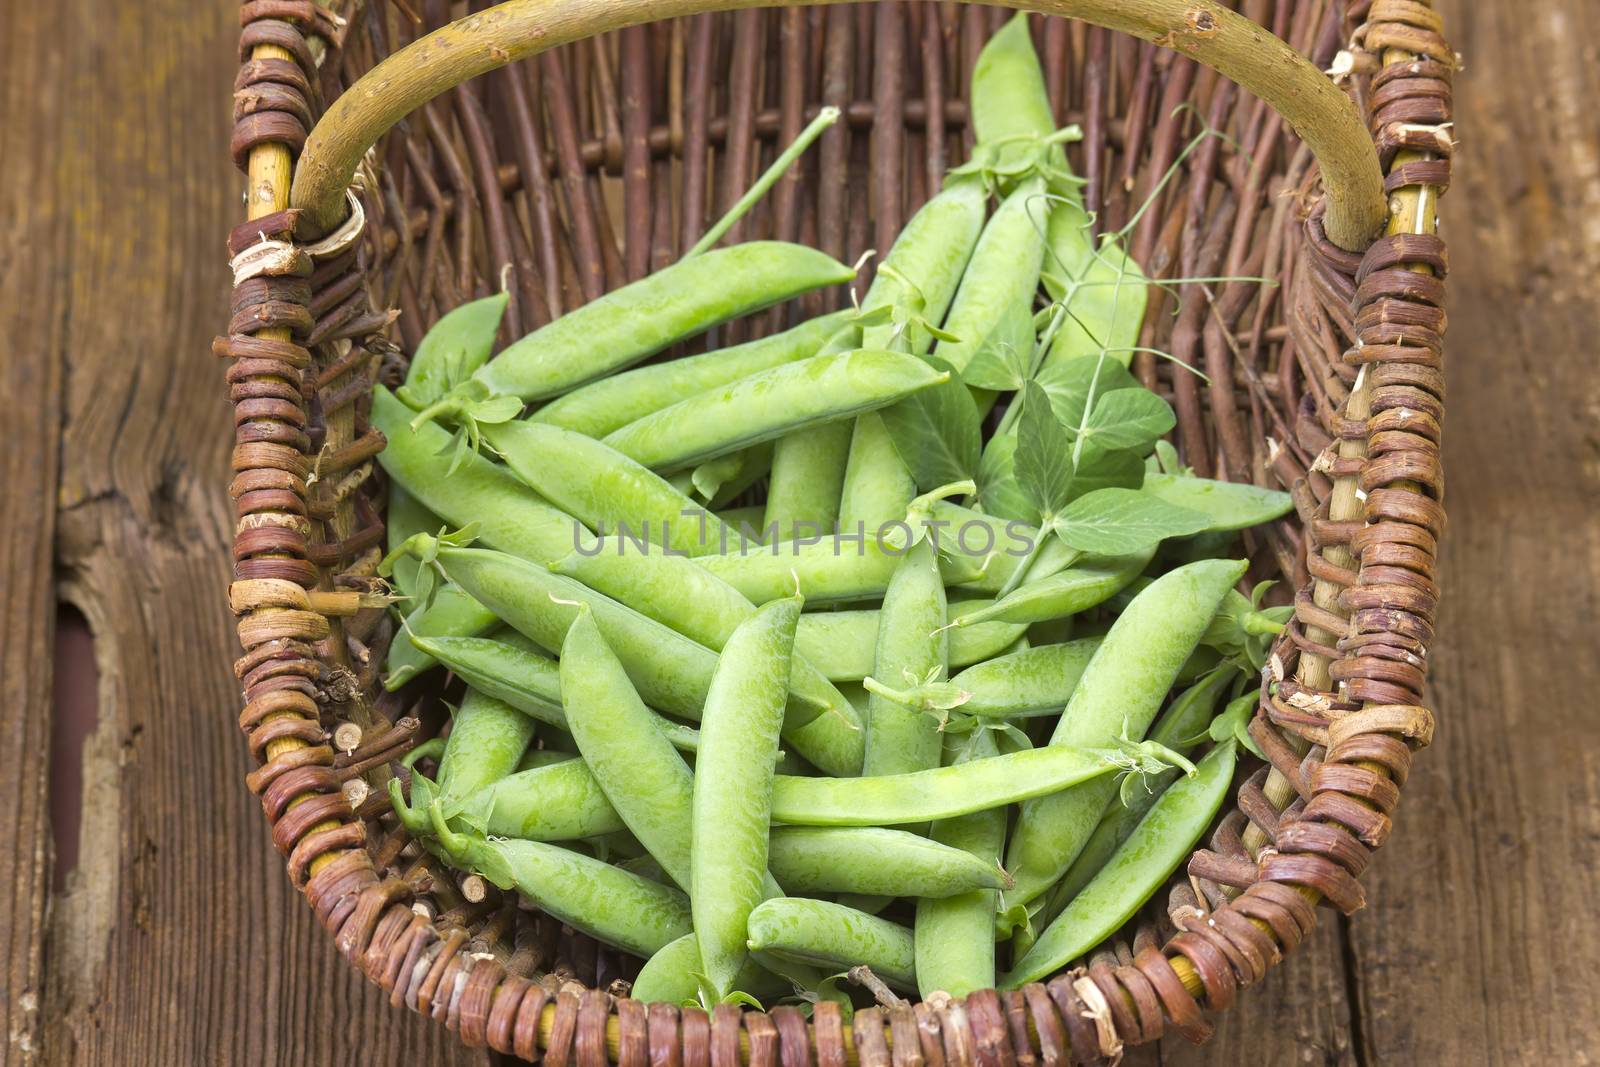 wicker basket full of green peas on wooden background by miradrozdowski